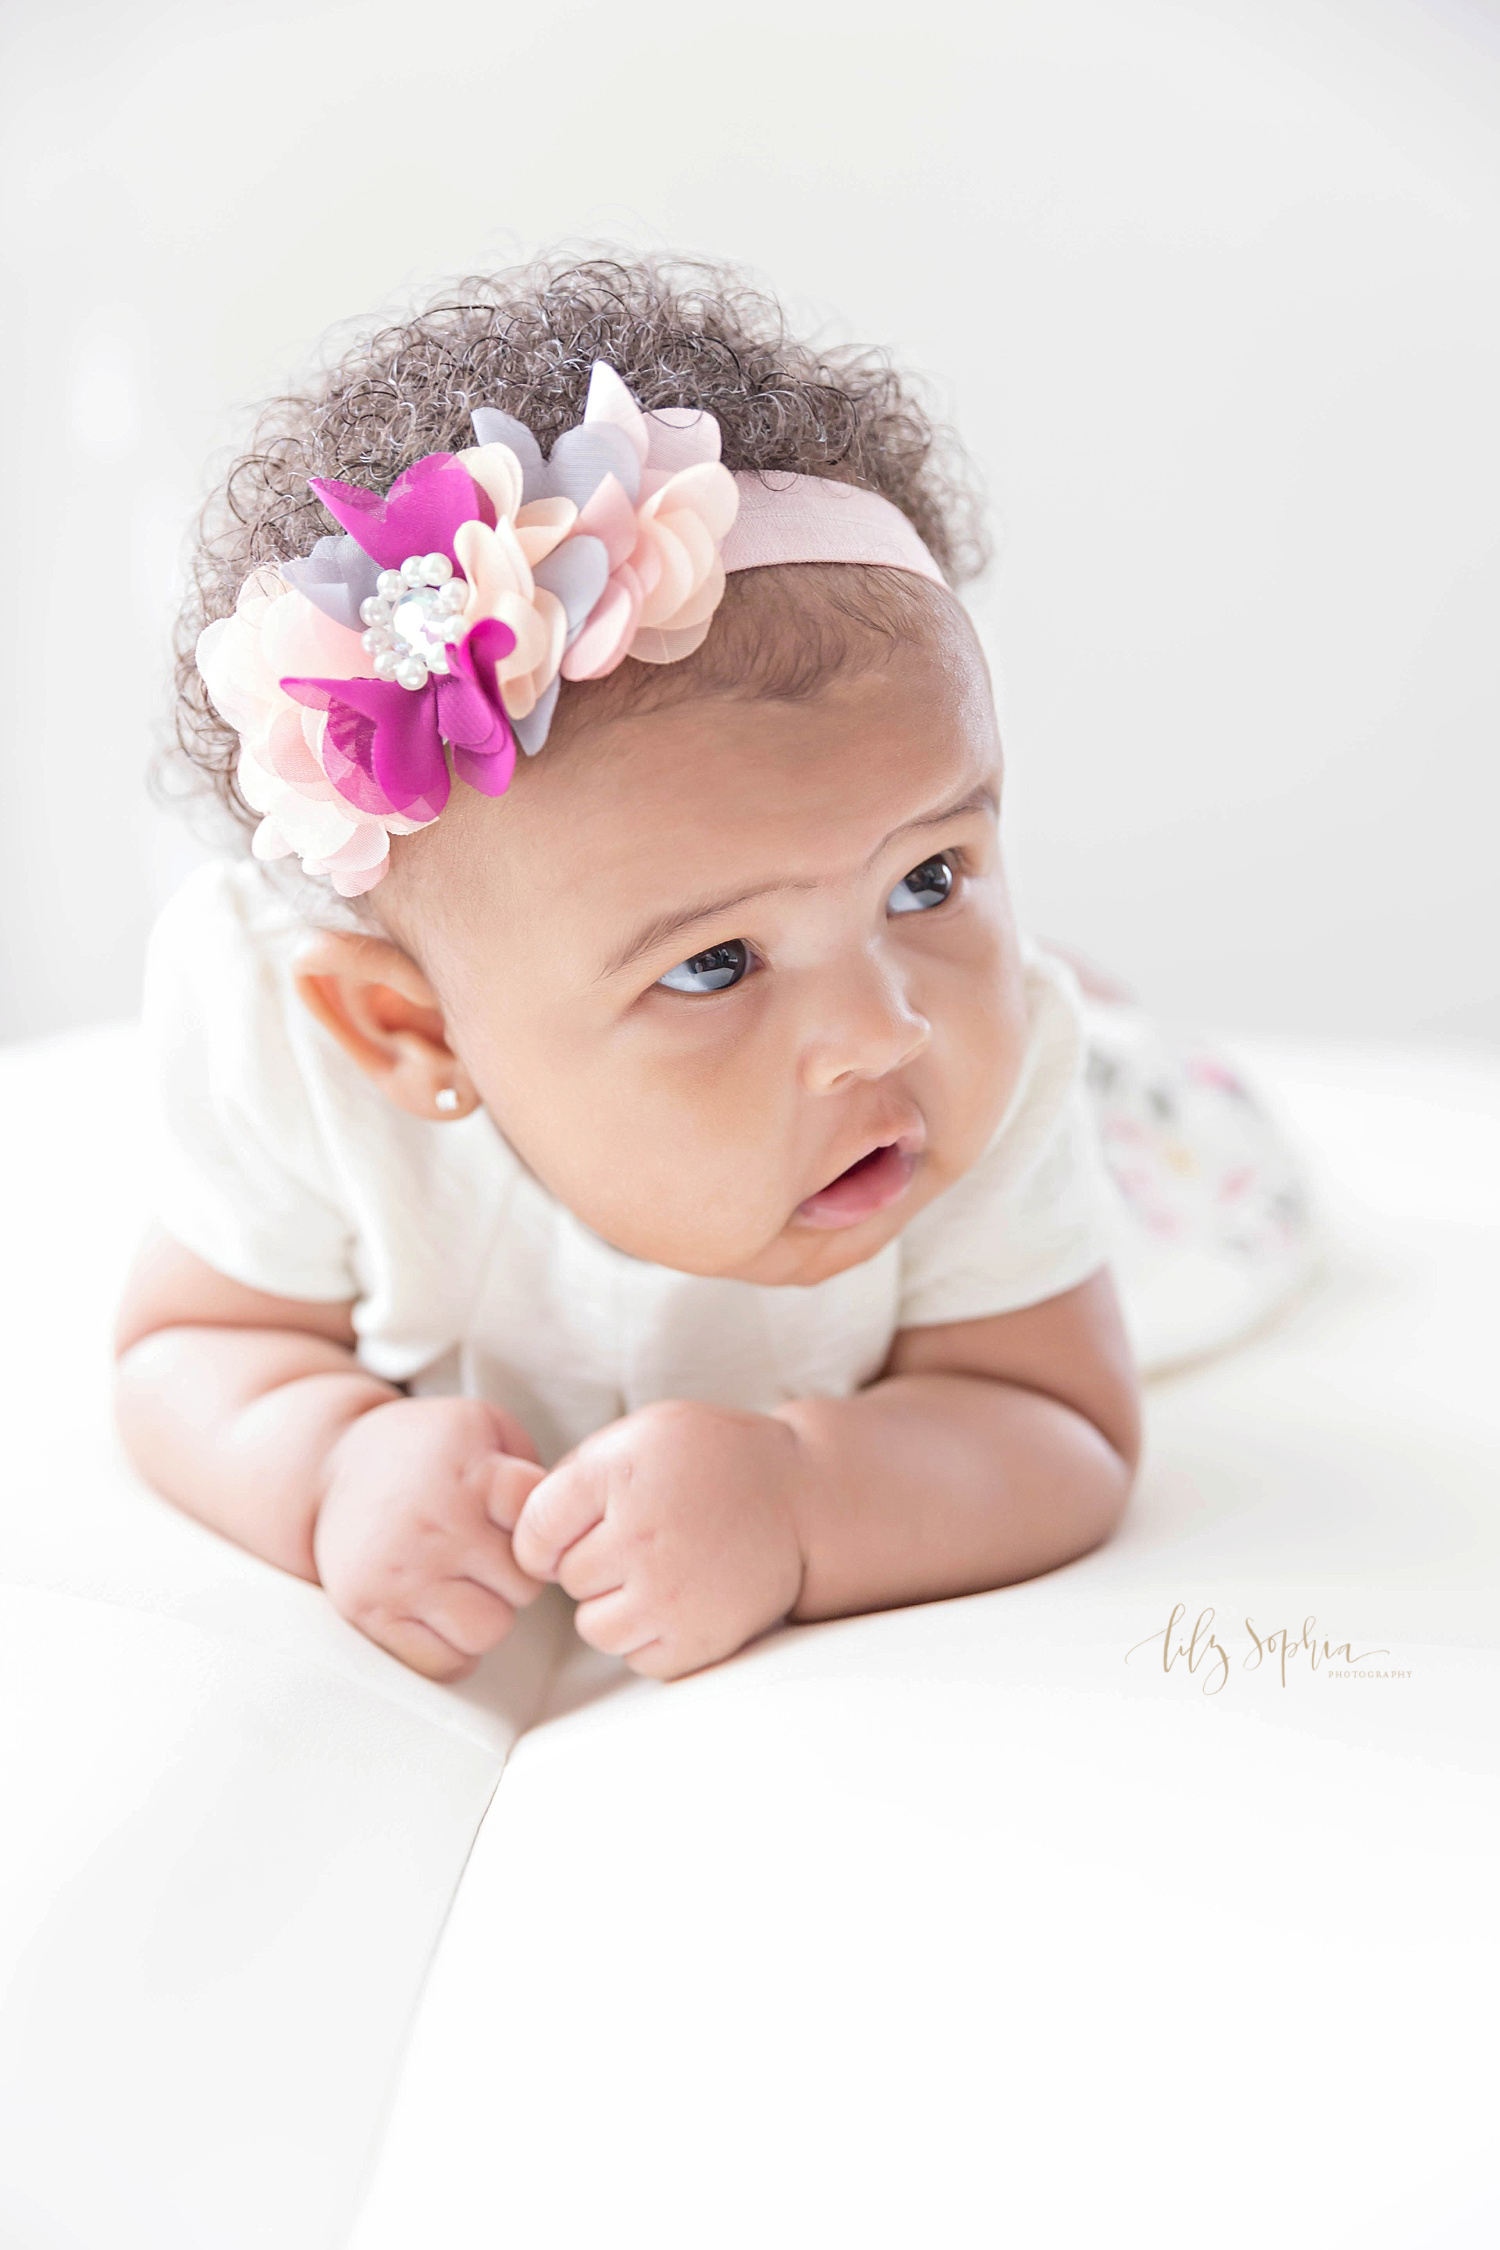  Image of an African American, baby girl, wearing a white dress and a pink and white flower headband in her hair, and trying to push up on her arms.&nbsp; 